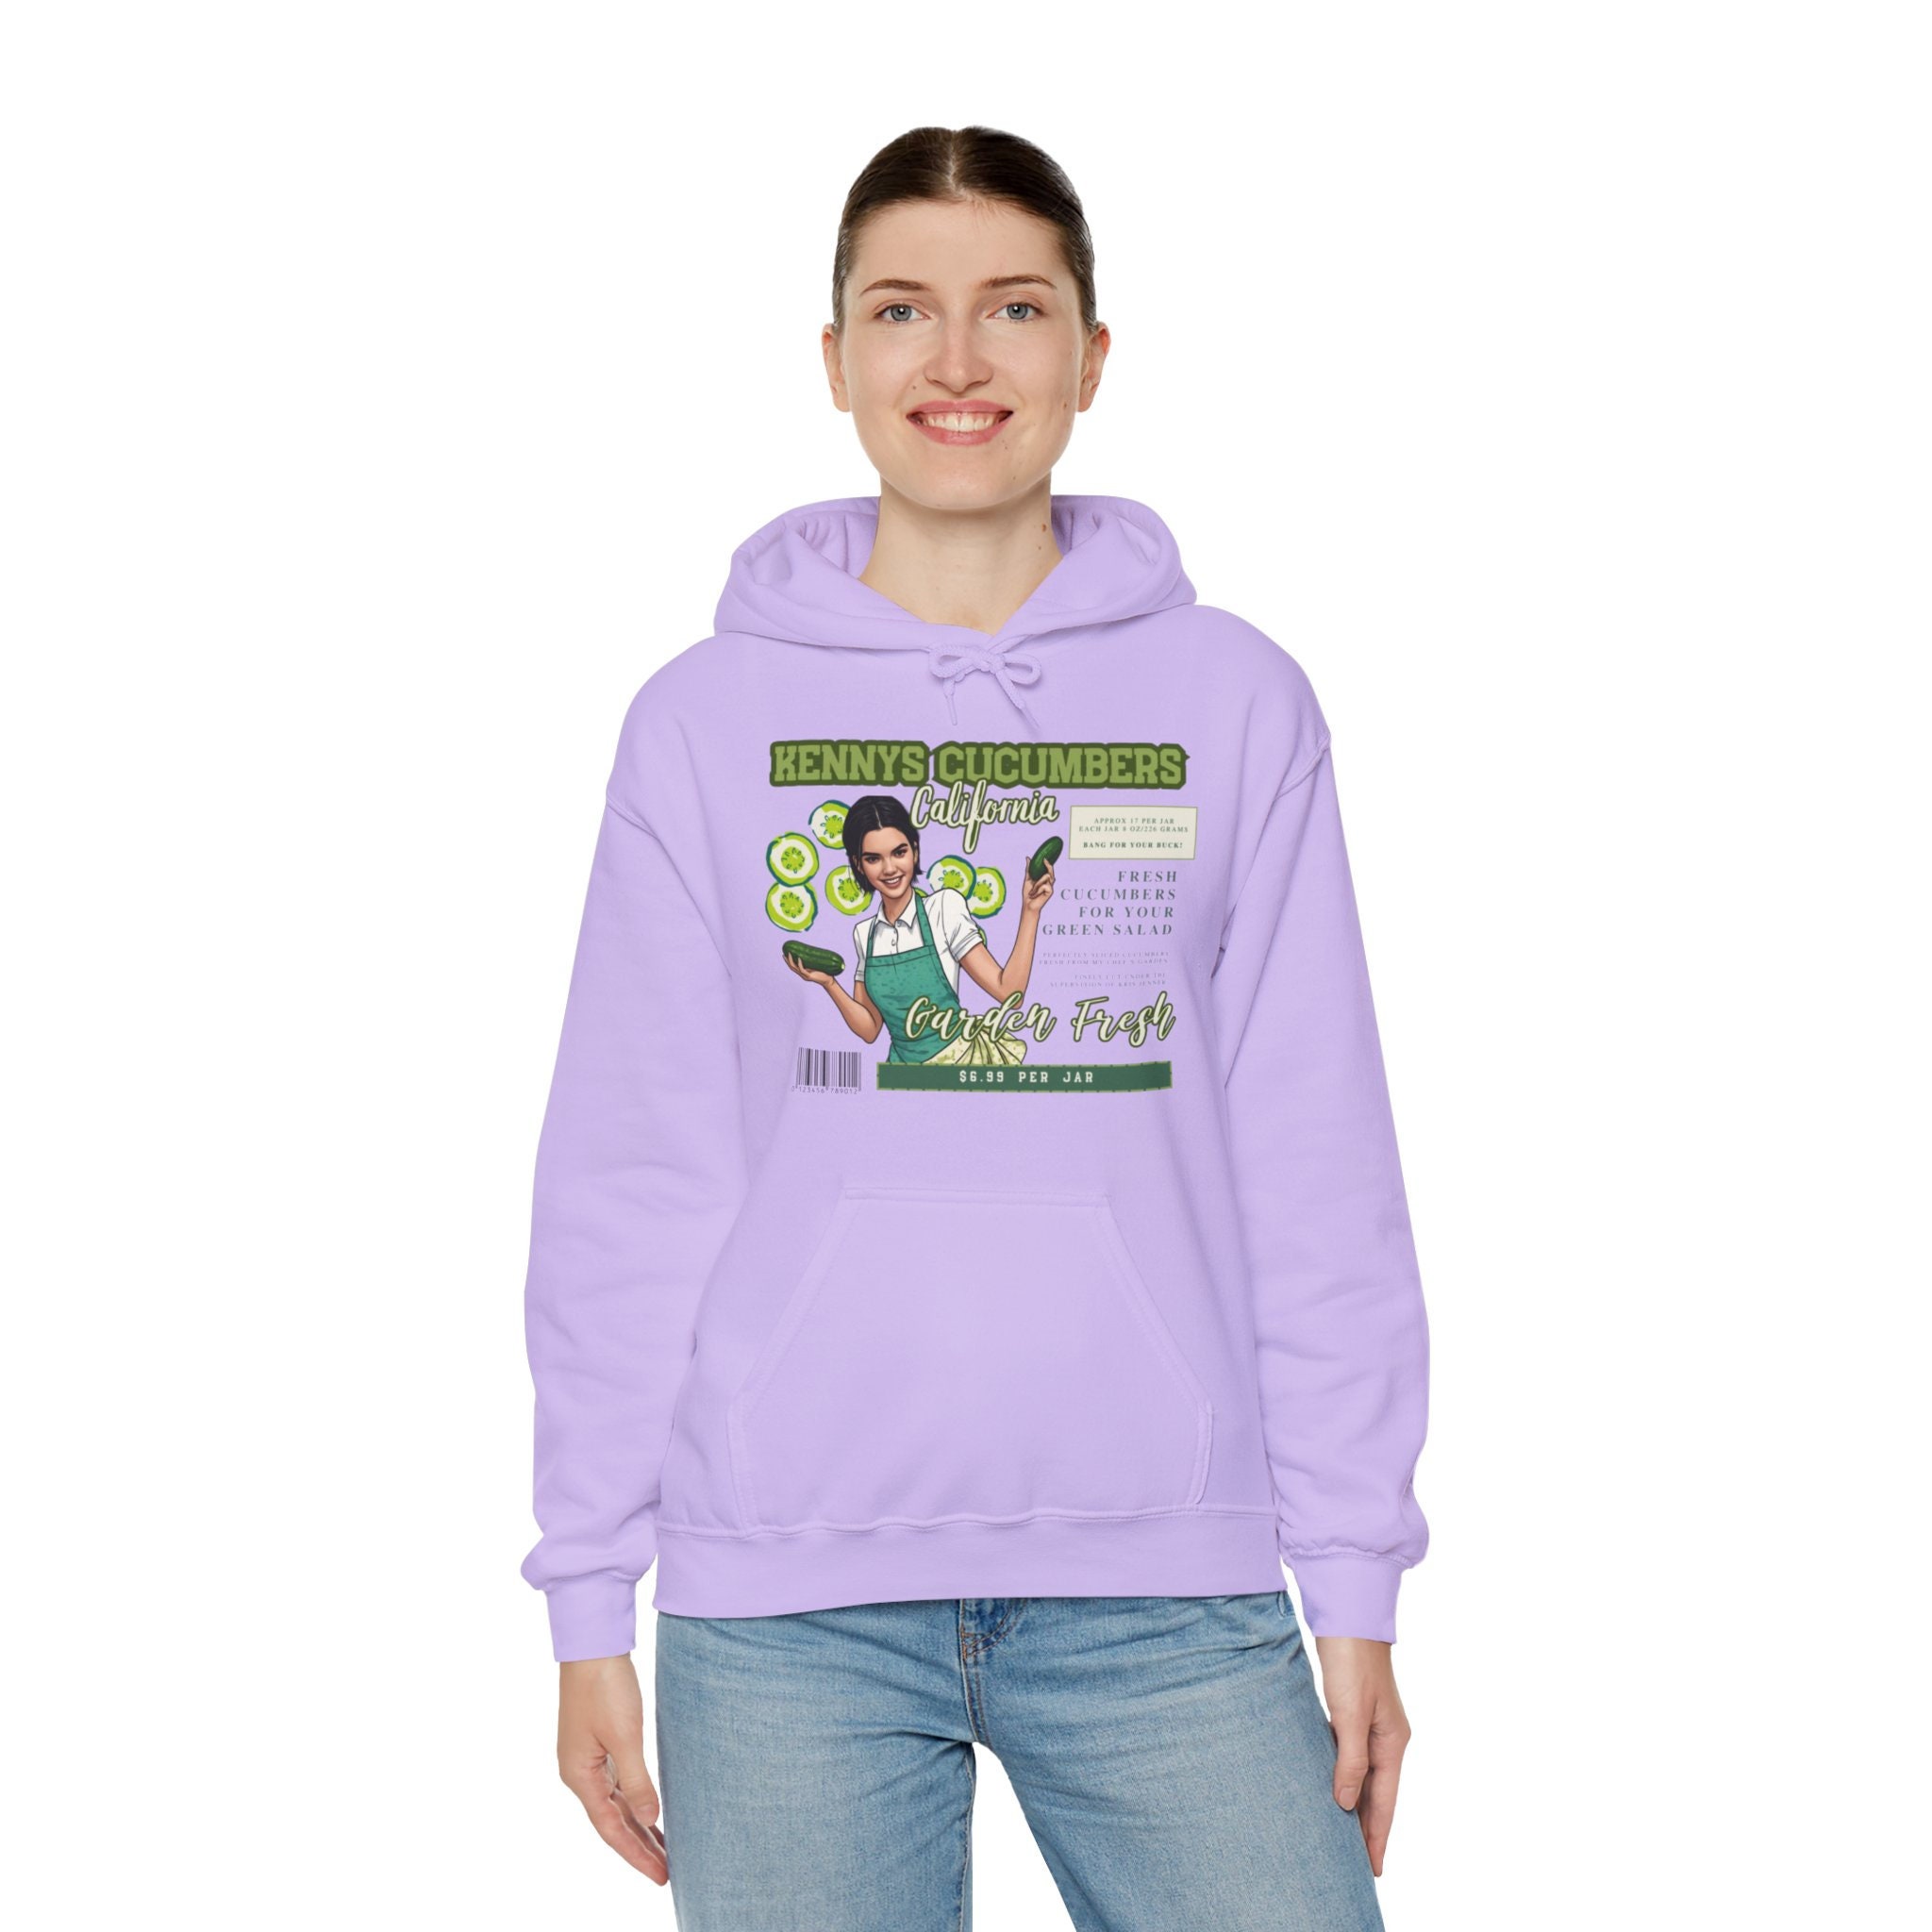 Kendall Jenner Tweet Quote Hoodie They Act Like I'm Not in Full